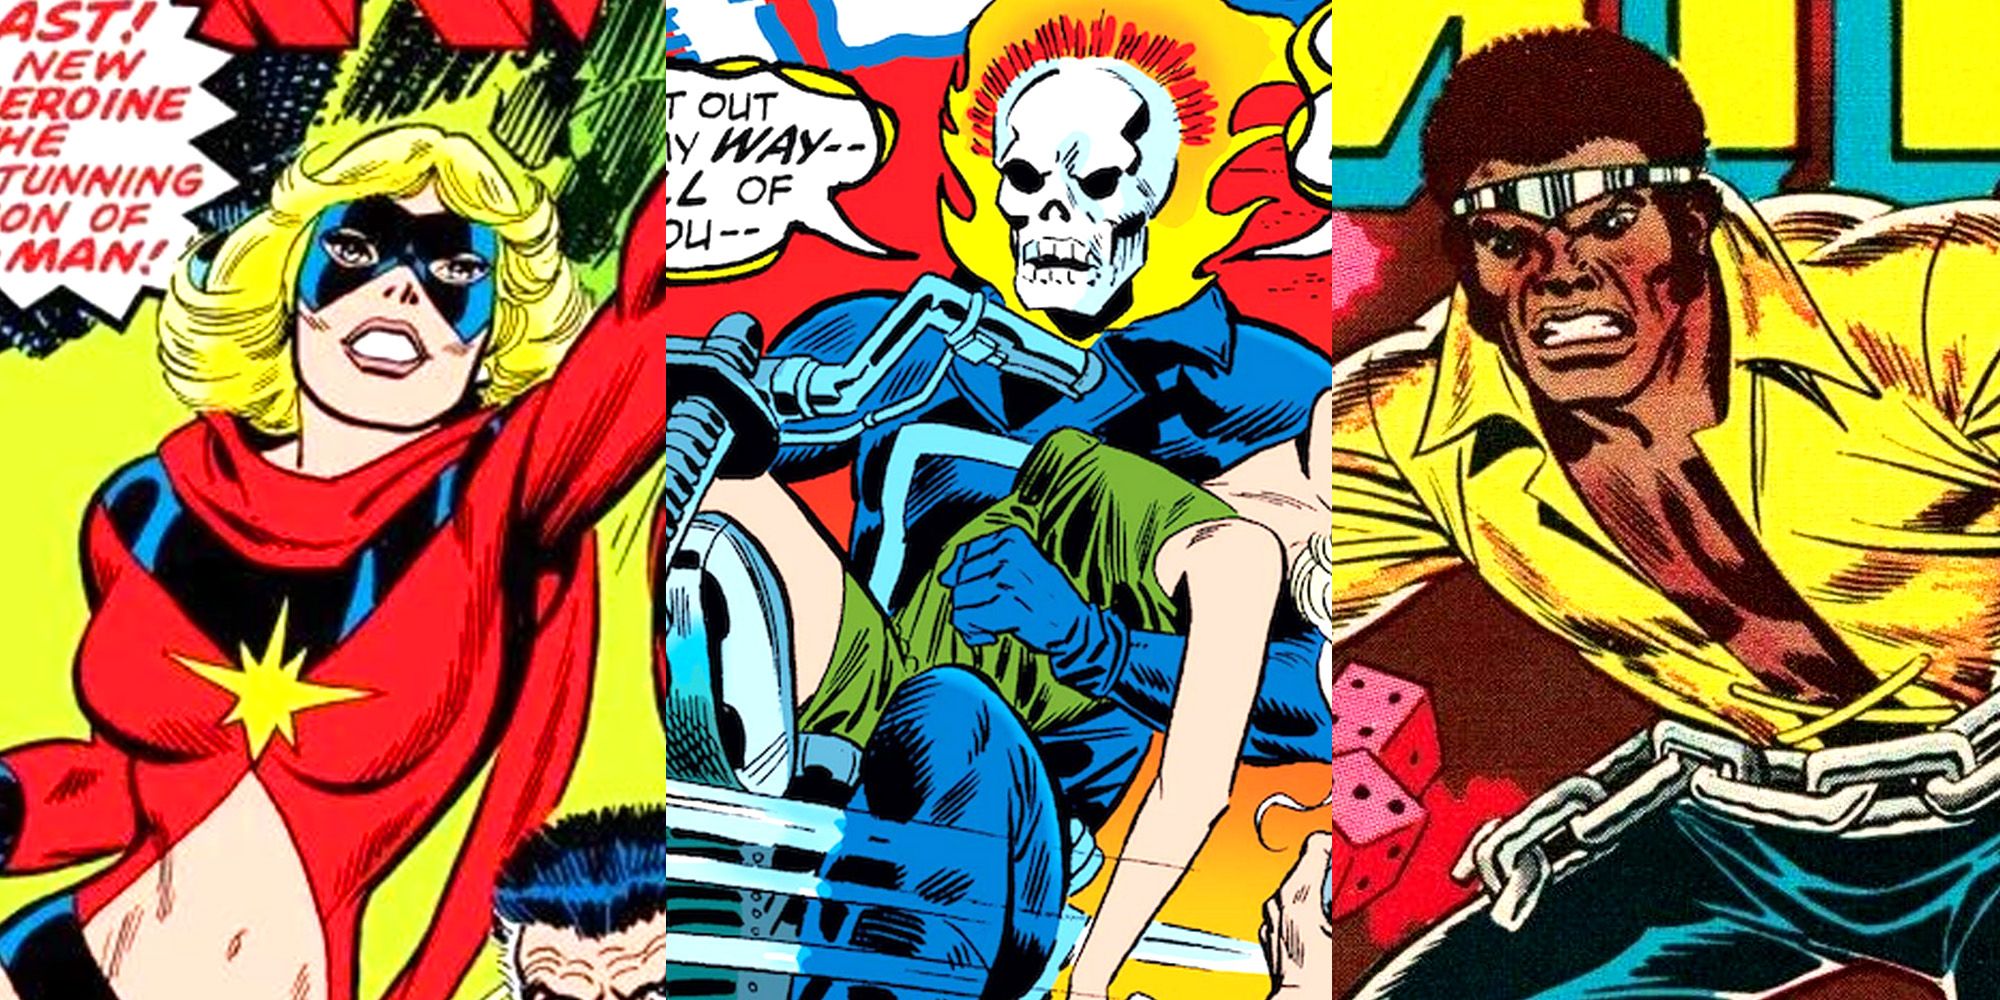 A split image of Captain Marvel flying, Ghost Rider riding his motorcycle, and Luke Cage preparing to fight someone in the Marvel Comics